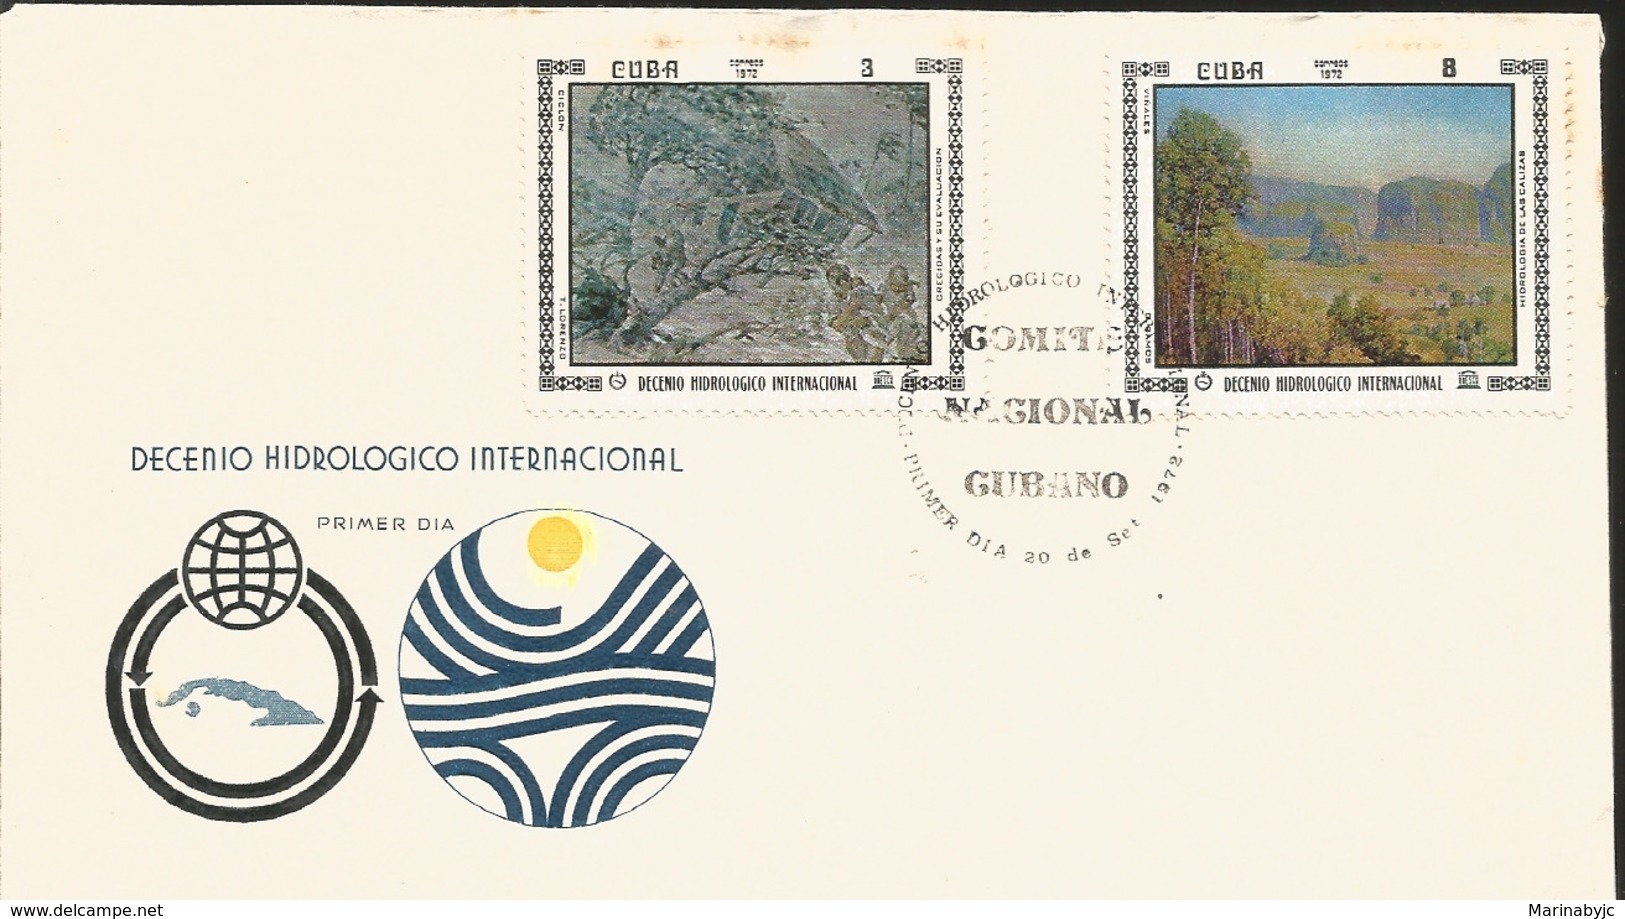 V) 1972 CARIBBEAN, INTL. HYDROLOGICAL DECADE, CYCLONE BY TIBURCIO LORENZO, VINALES BY RAMOS, BLACK CANCELLATION, FDC - Covers & Documents